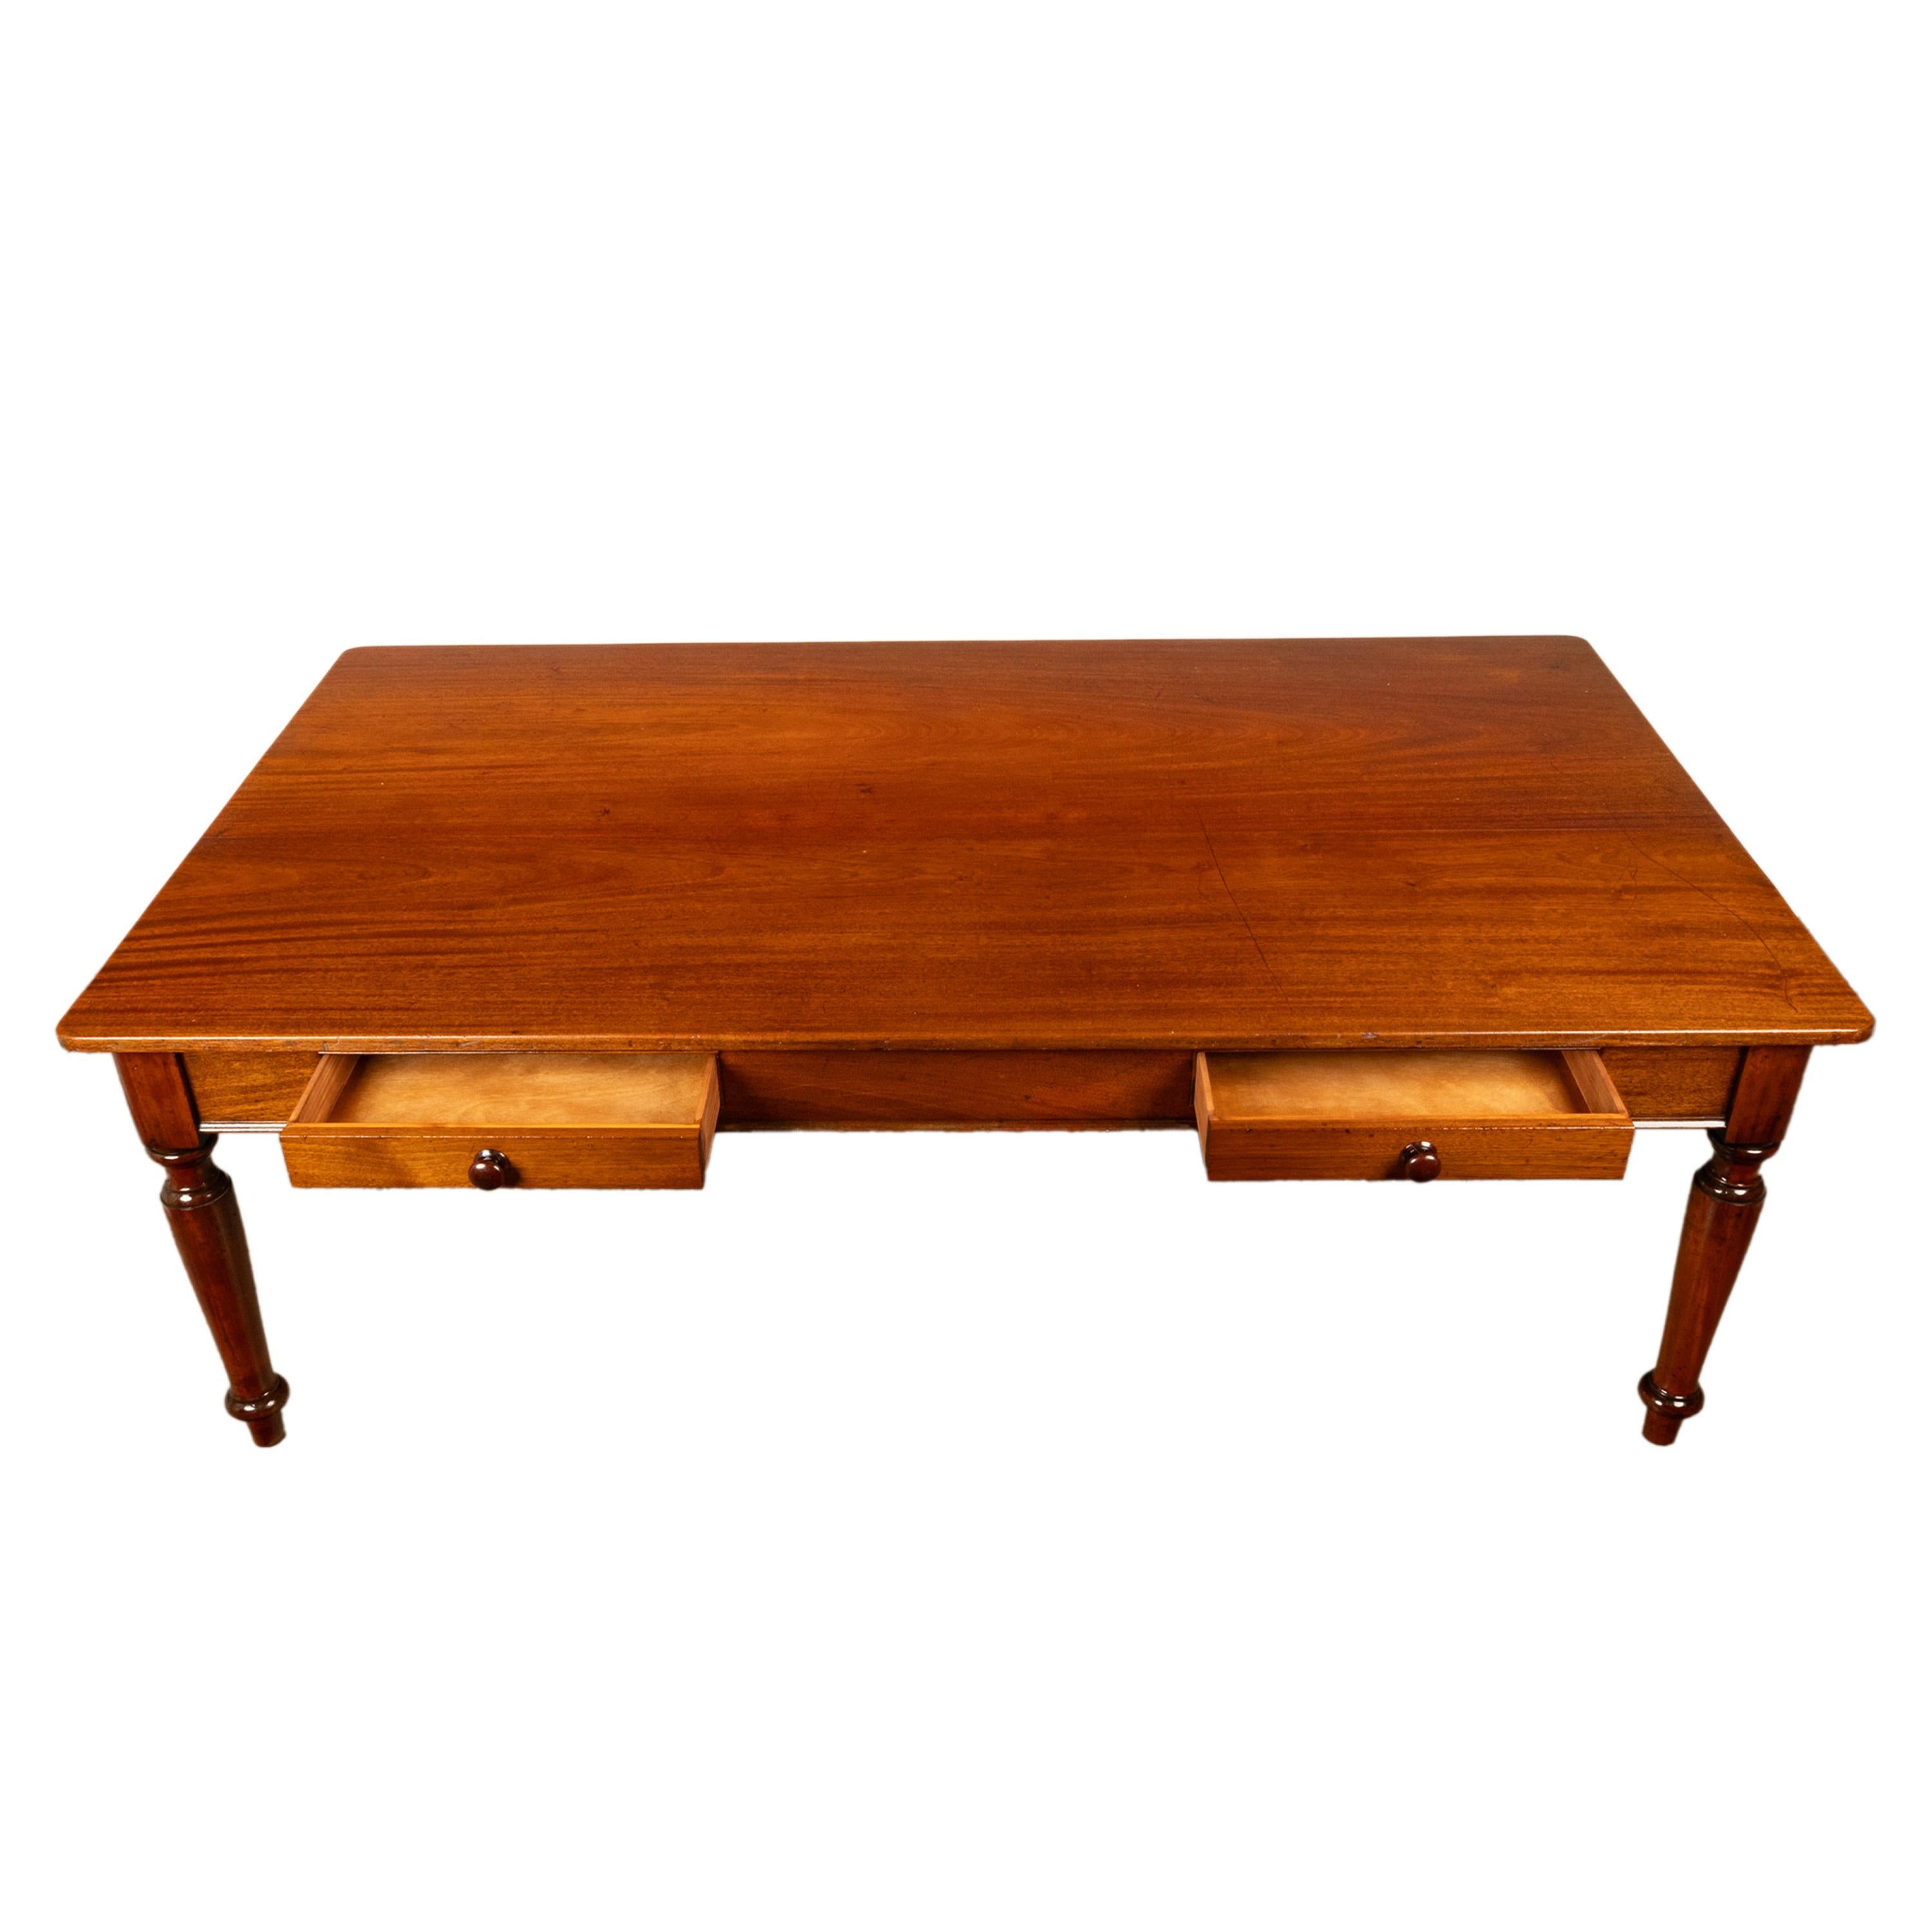 Antique Monumental 19th Century Mahogany Library Conference Dining Table 1860 For Sale 1